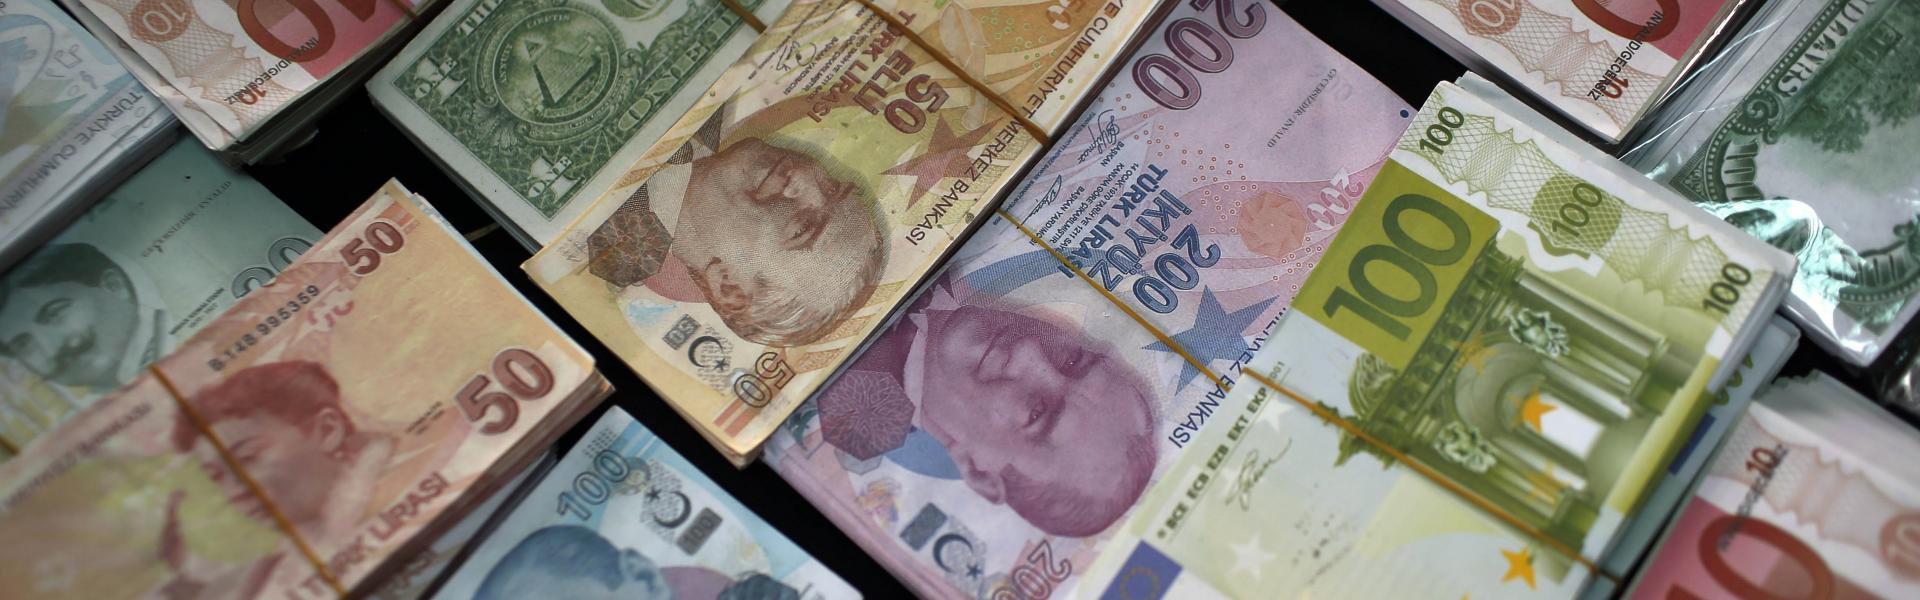 Disputed Vote Hangs Over Turkey While Lira Resumes Its Decline 81